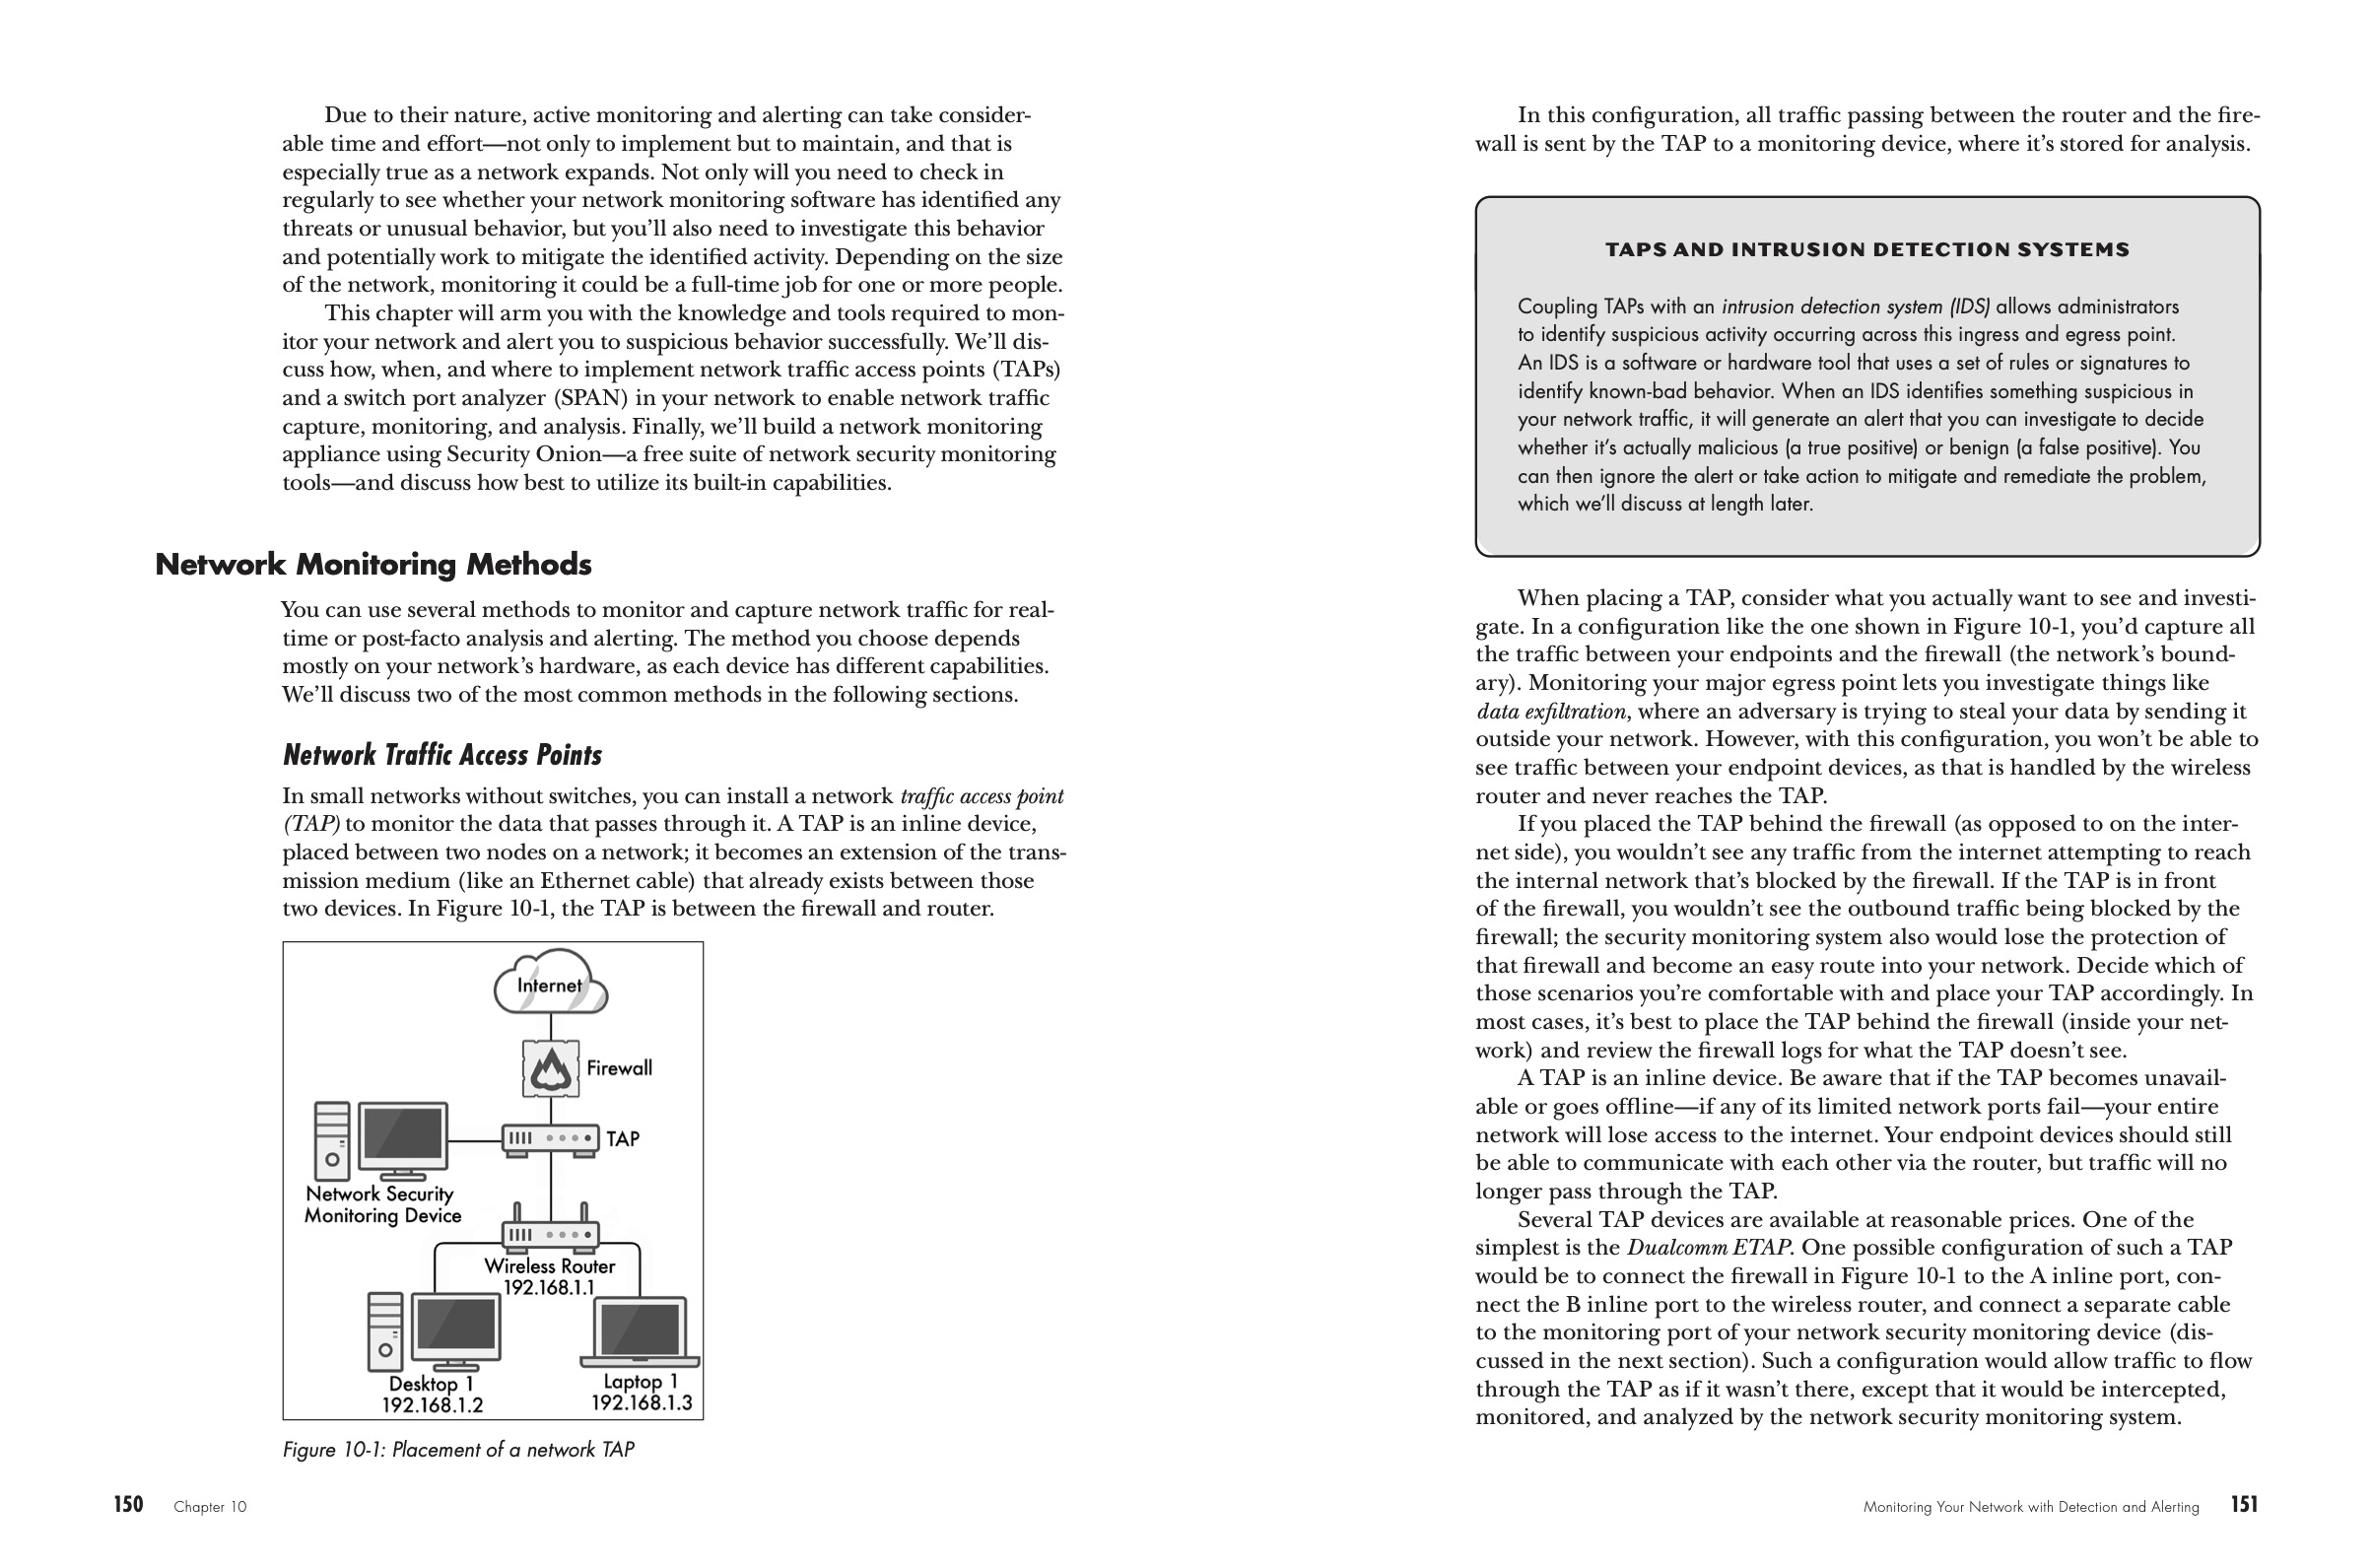 Cybersecurity for Small Networks pages 150-151